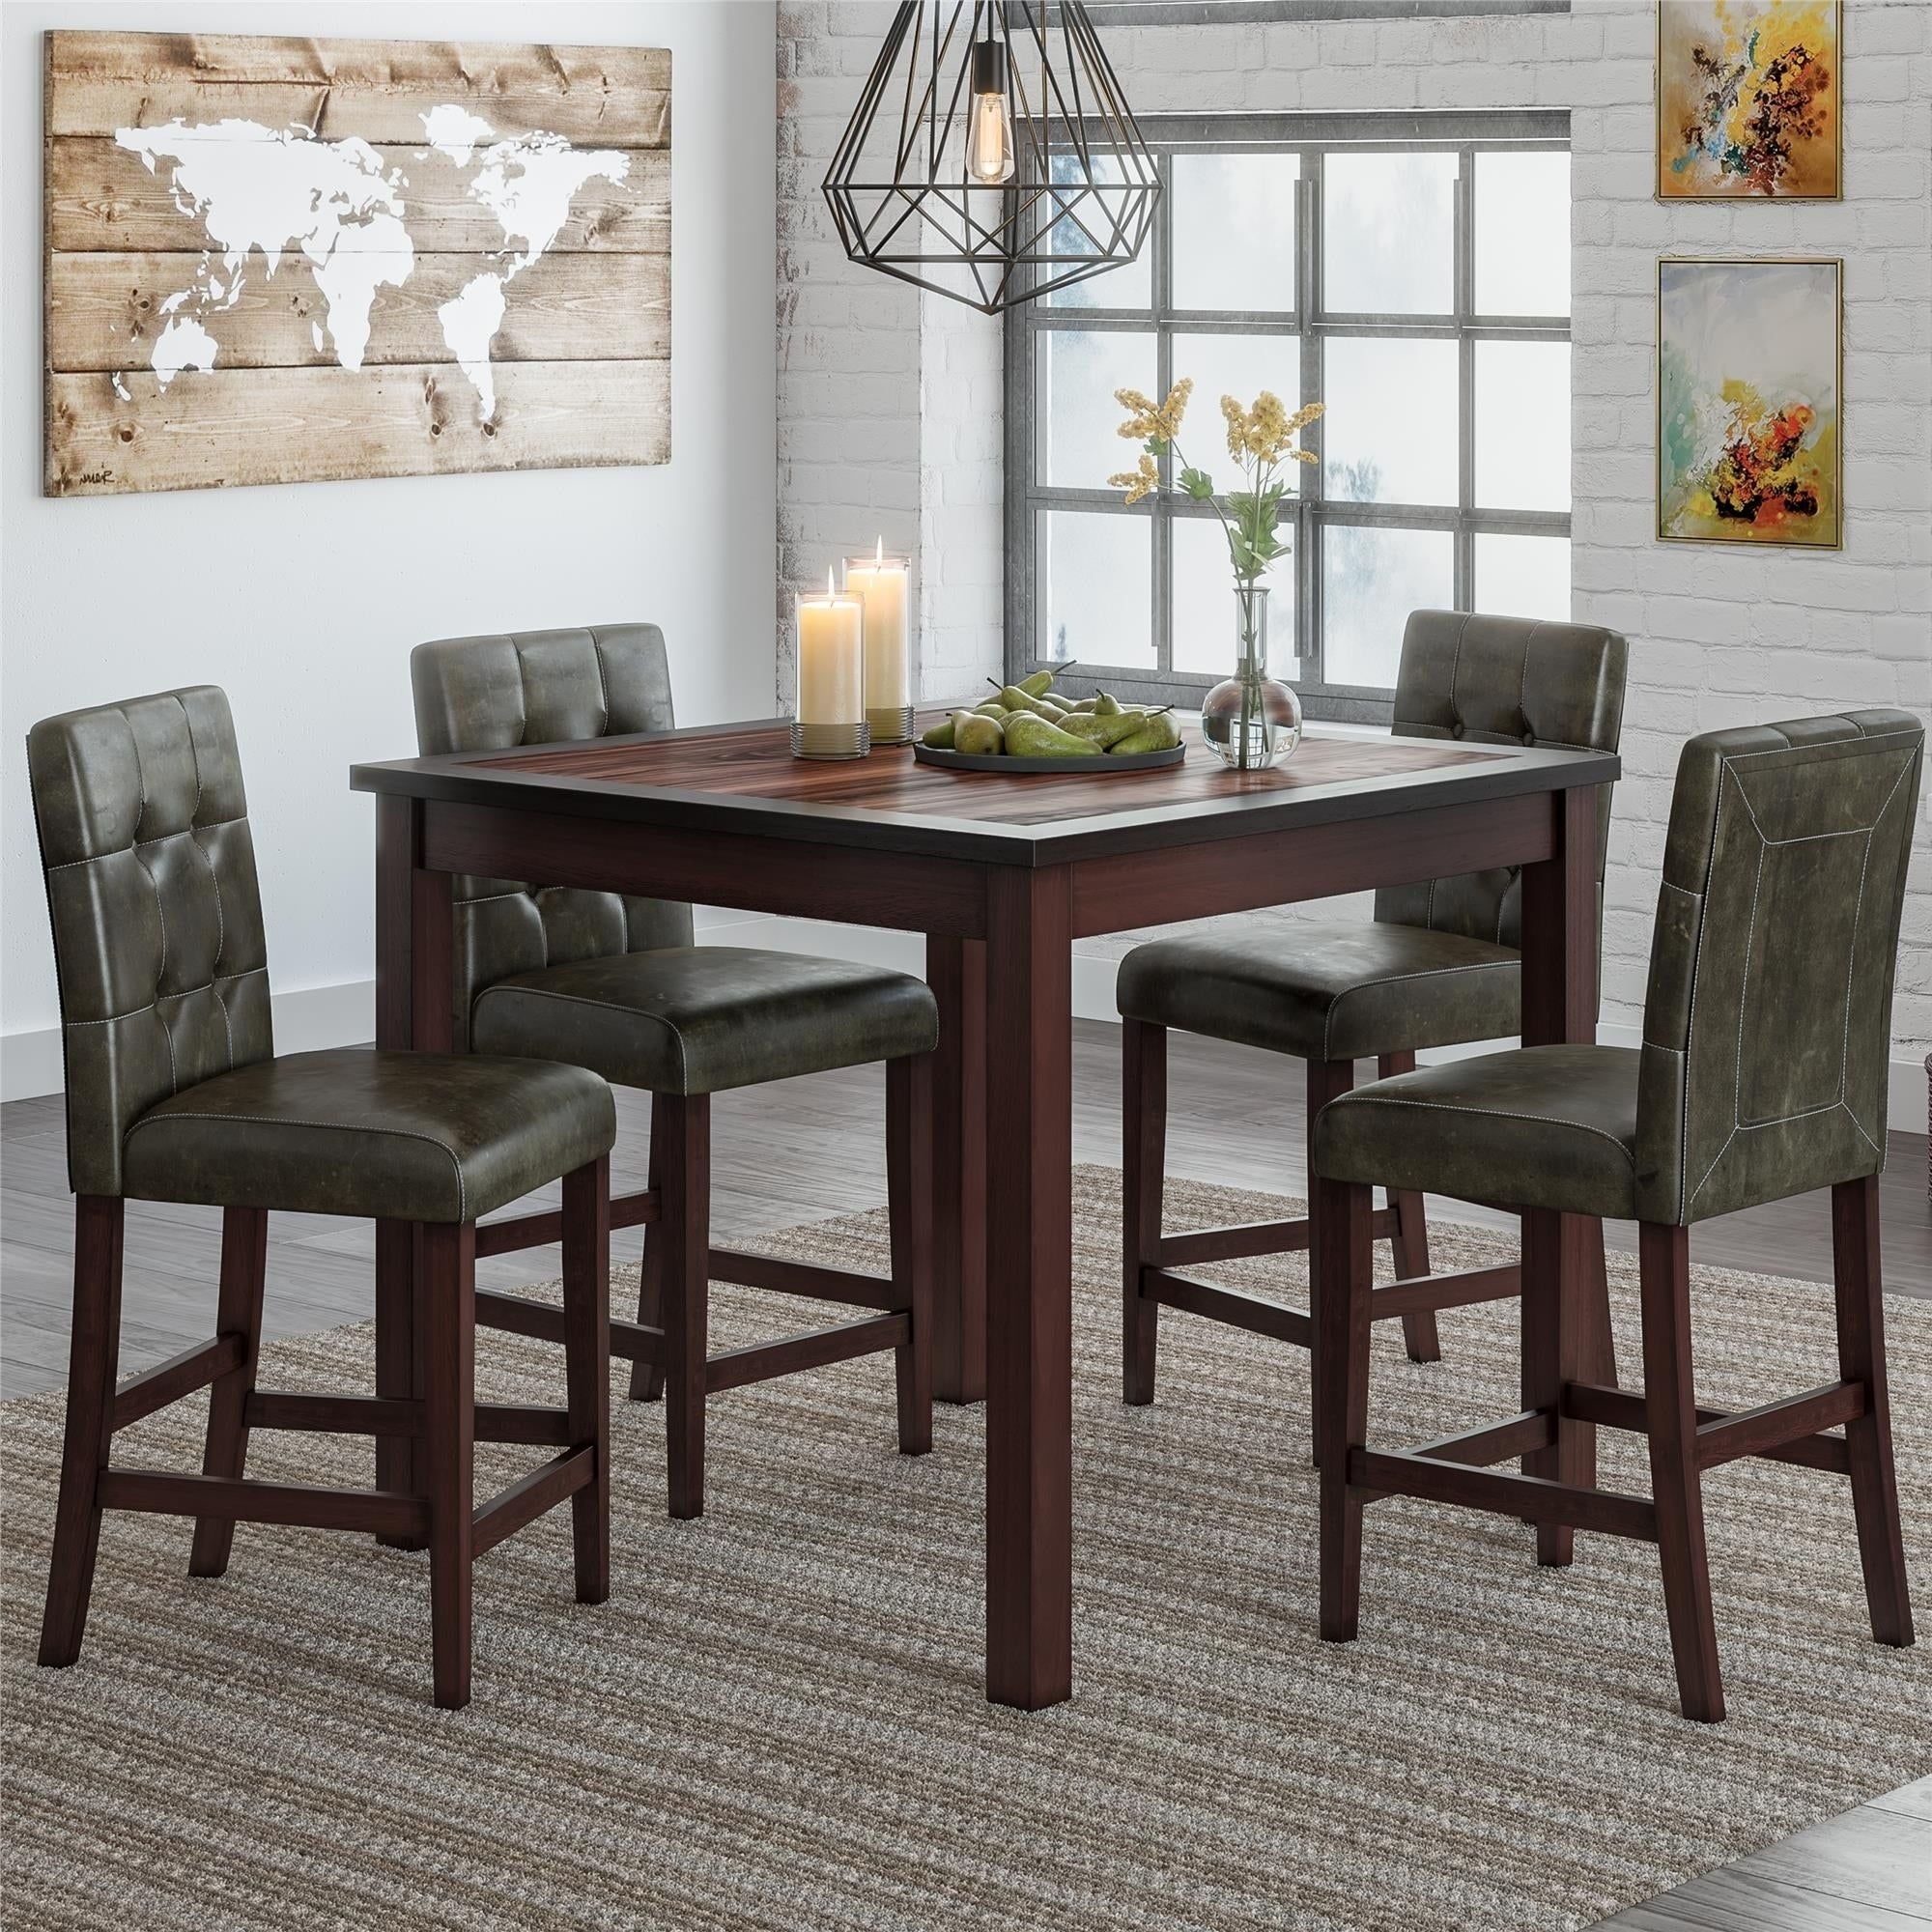 Gracewood Hollow Betancourt Espresso 5 Piece Counter Height Dining Set Throughout Most Recently Released Bettencourt 3 Piece Counter Height Dining Sets (View 14 of 20)